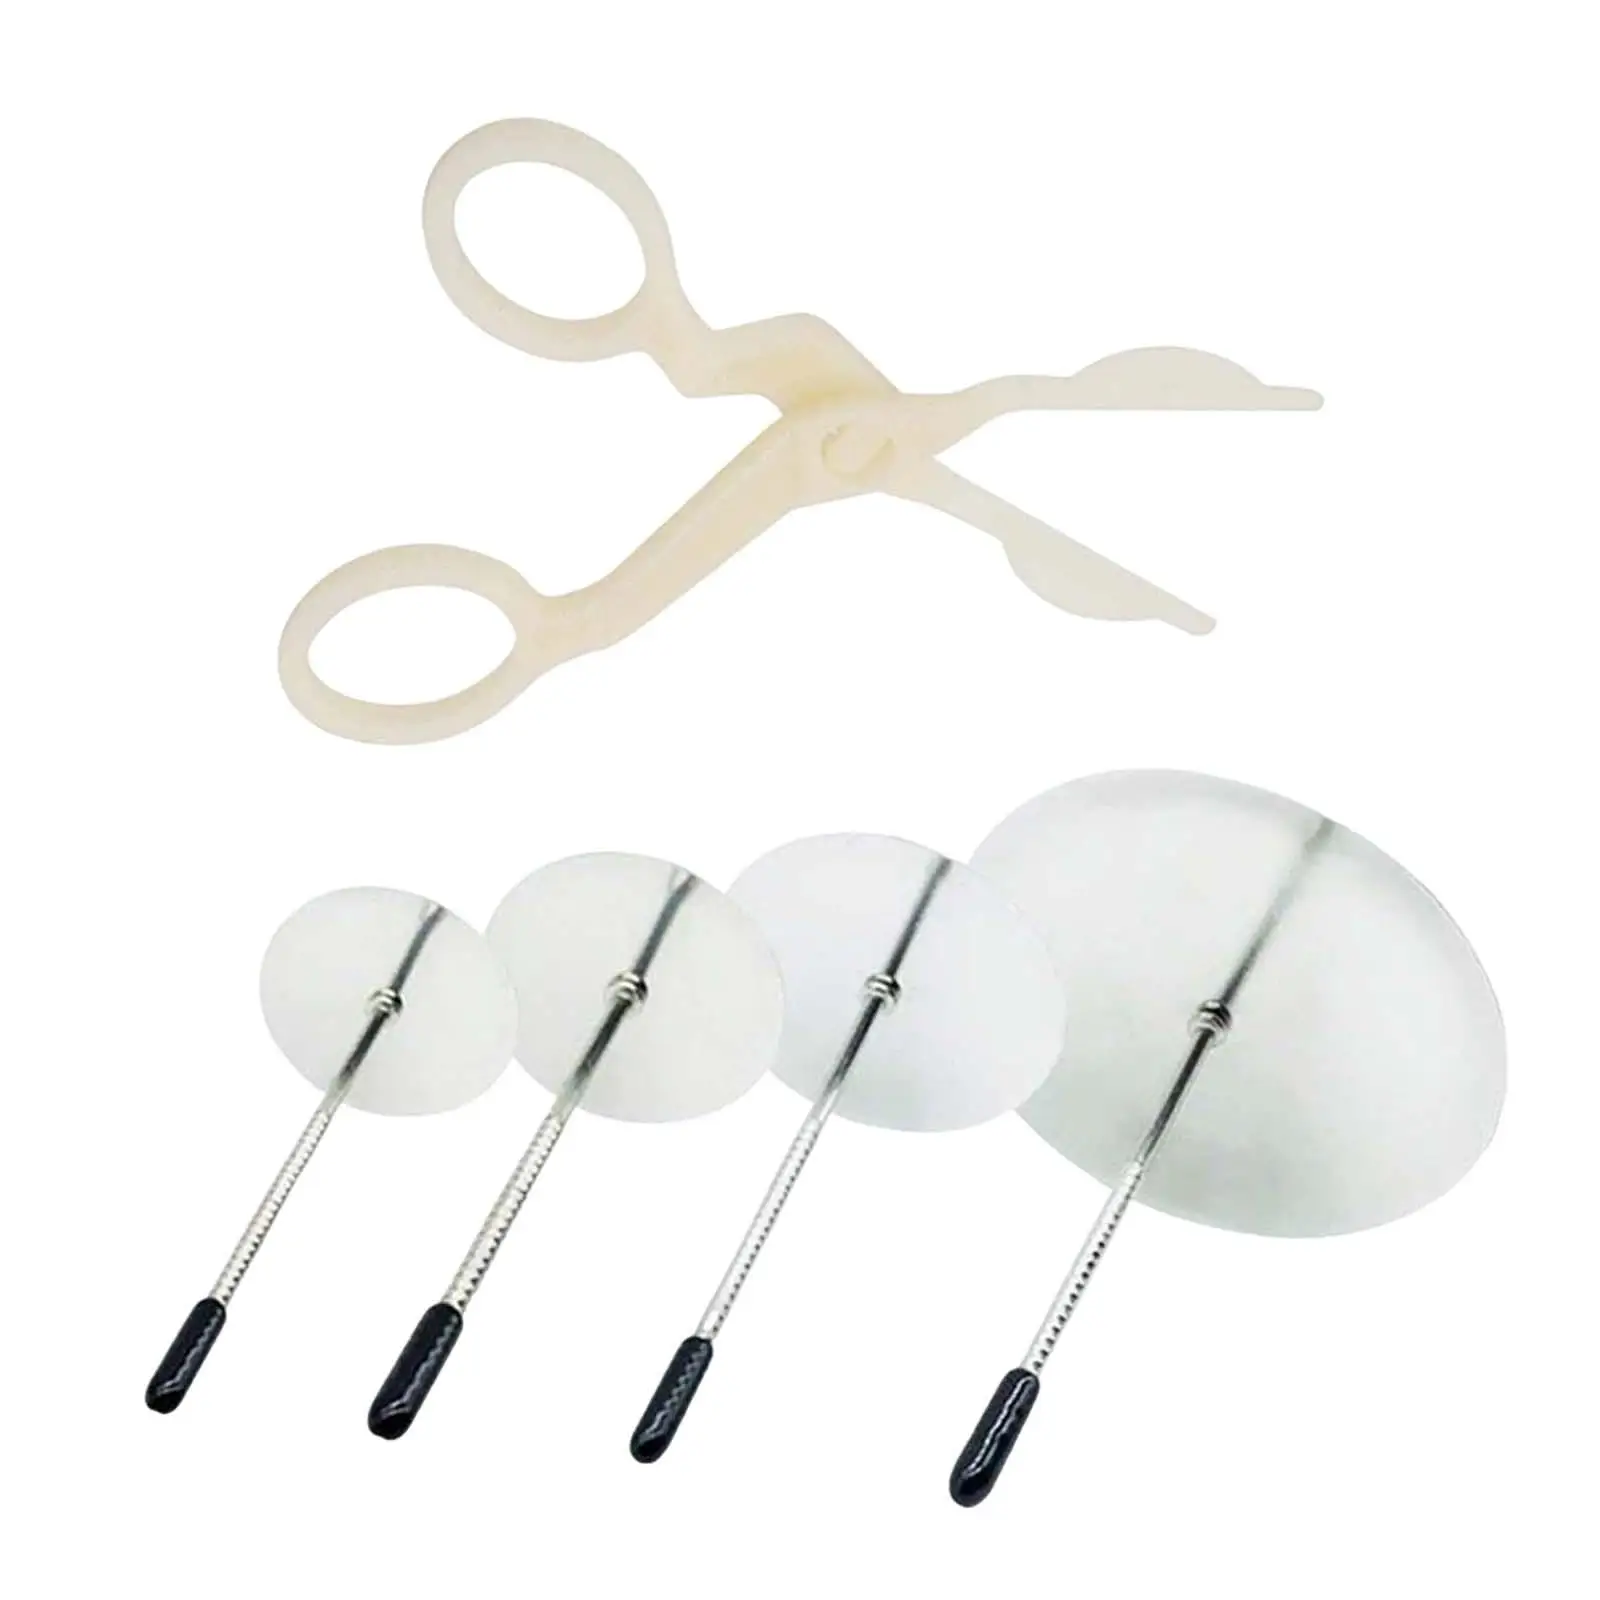 Piping Flower Scissor Ornament Fittings Display Plate Cream Transfer Cake Stand Flower Lifter for Cookies Cake Icing Frosting